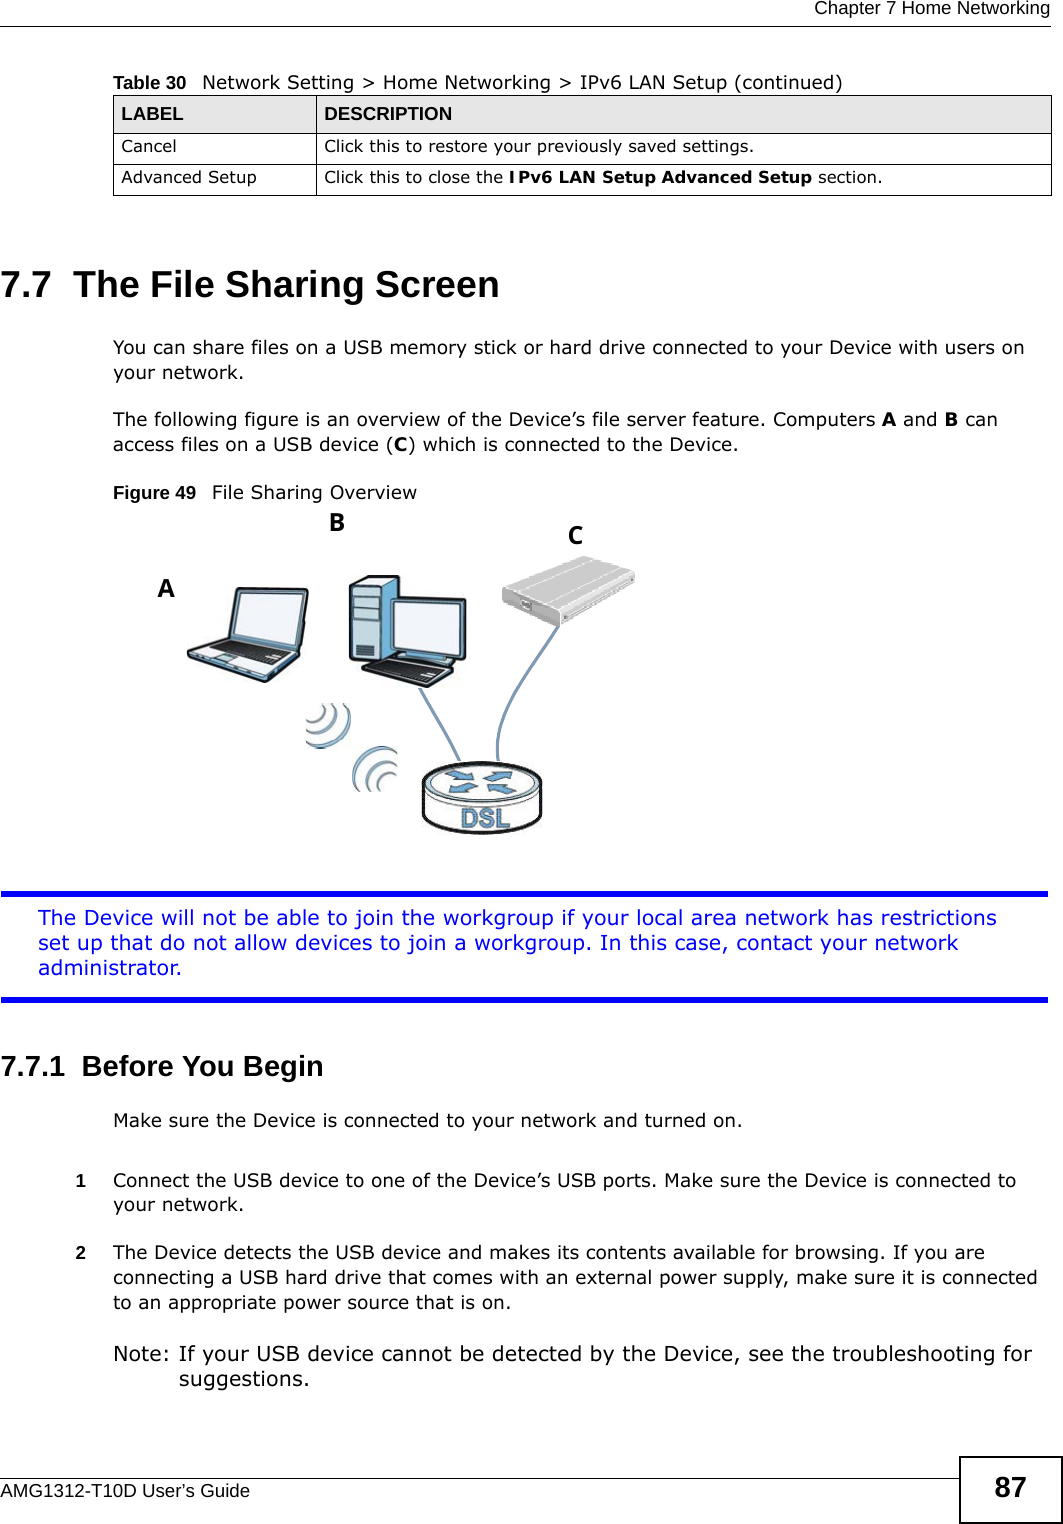  Chapter 7 Home NetworkingAMG1312-T10D User’s Guide 877.7  The File Sharing ScreenYou can share files on a USB memory stick or hard drive connected to your Device with users on your network. The following figure is an overview of the Device’s file server feature. Computers A and B can access files on a USB device (C) which is connected to the Device.Figure 49   File Sharing OverviewThe Device will not be able to join the workgroup if your local area network has restrictions set up that do not allow devices to join a workgroup. In this case, contact your network administrator.7.7.1  Before You BeginMake sure the Device is connected to your network and turned on.1Connect the USB device to one of the Device’s USB ports. Make sure the Device is connected to your network.2The Device detects the USB device and makes its contents available for browsing. If you are connecting a USB hard drive that comes with an external power supply, make sure it is connected to an appropriate power source that is on.Note: If your USB device cannot be detected by the Device, see the troubleshooting for suggestions. Cancel Click this to restore your previously saved settings.Advanced Setup Click this to close the IPv6 LAN Setup Advanced Setup section.Table 30   Network Setting &gt; Home Networking &gt; IPv6 LAN Setup (continued)LABEL DESCRIPTIONABC